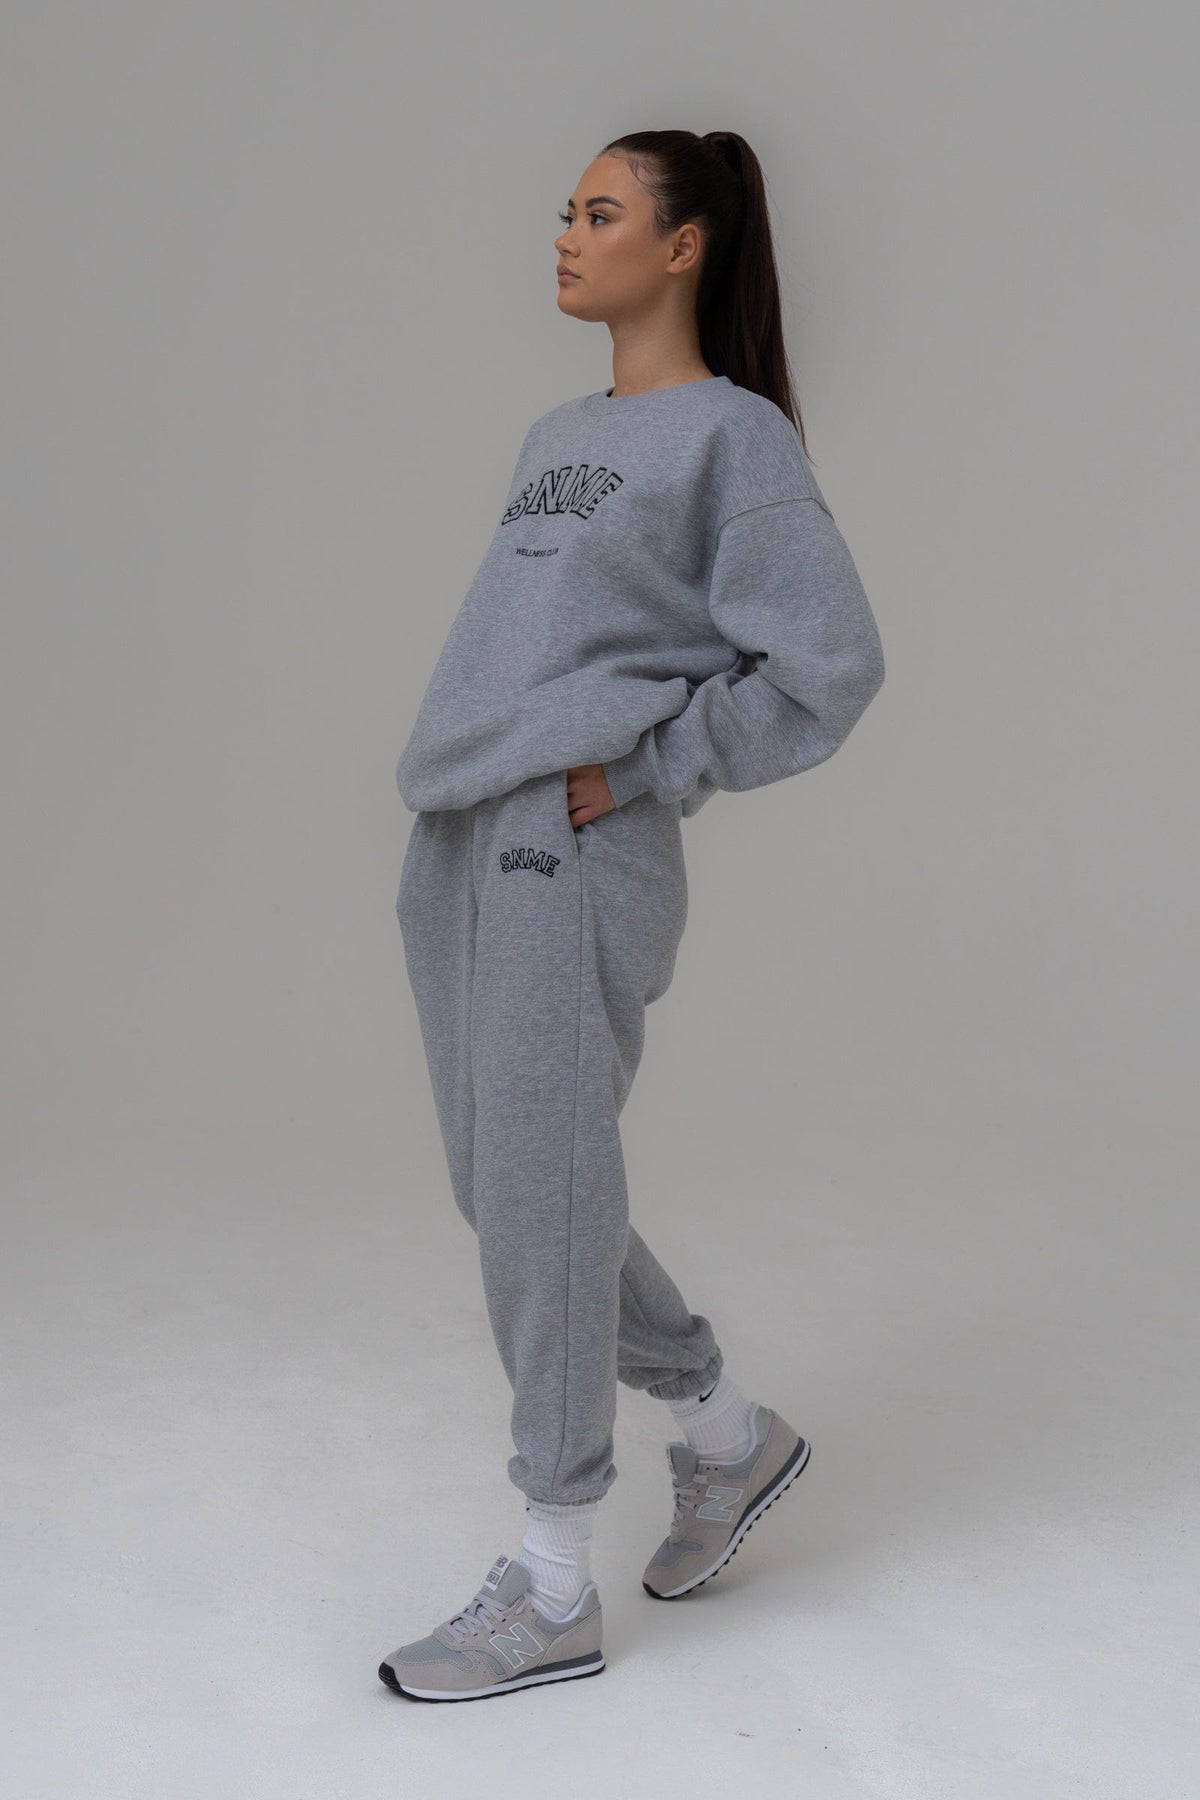 SIANMARIE Baggy Retro Joggers - Grey Track Pant